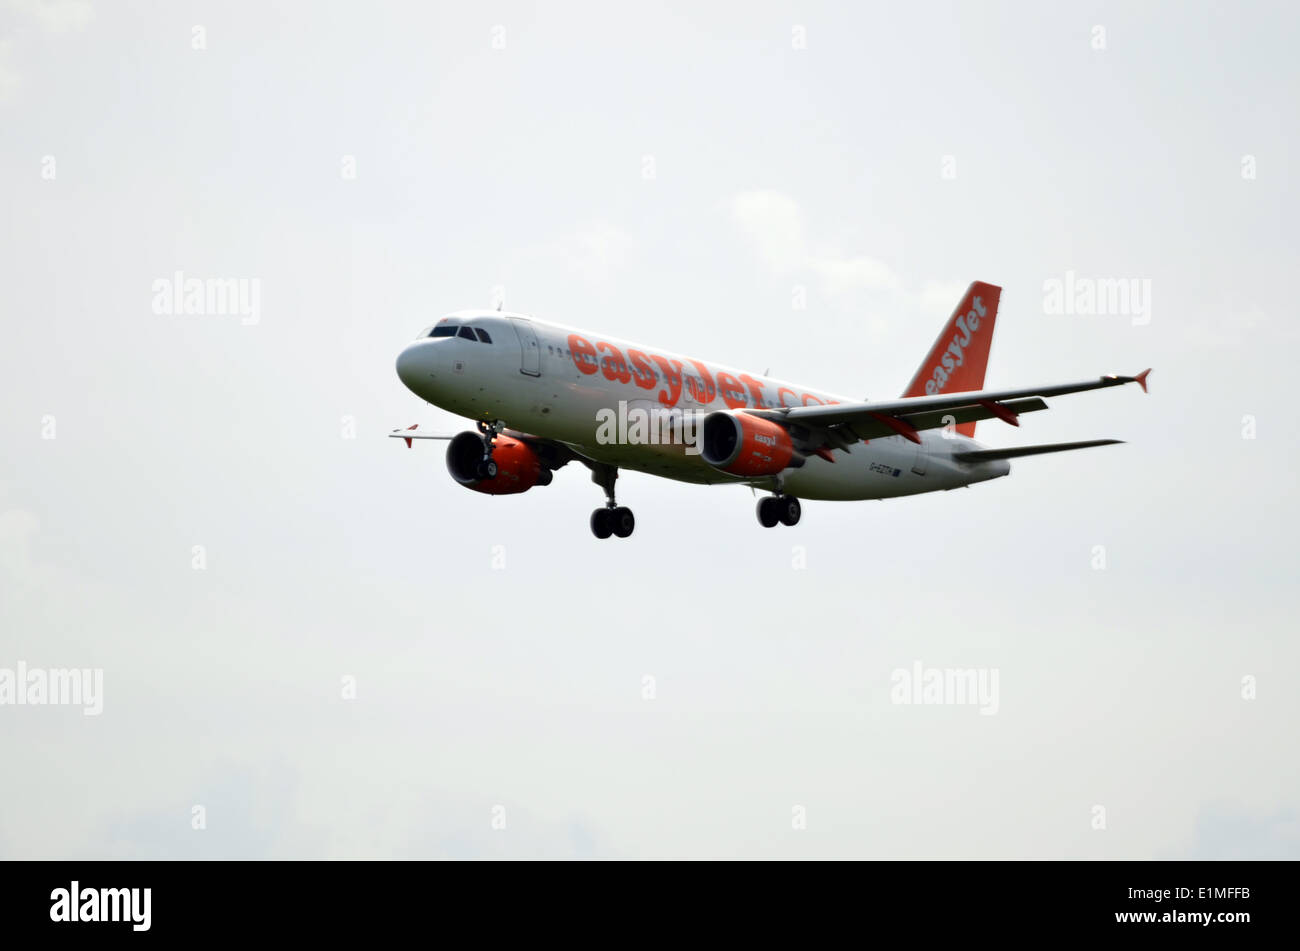 Bristol, UK. 6th June, 2014. In coming aircraft at Bristol Airport where a fire broke out in the Airport terminal computer panel and all electrics failed. Long Passanger Delays/Robert Timoney/AlamyLiveNews. Stock Photo